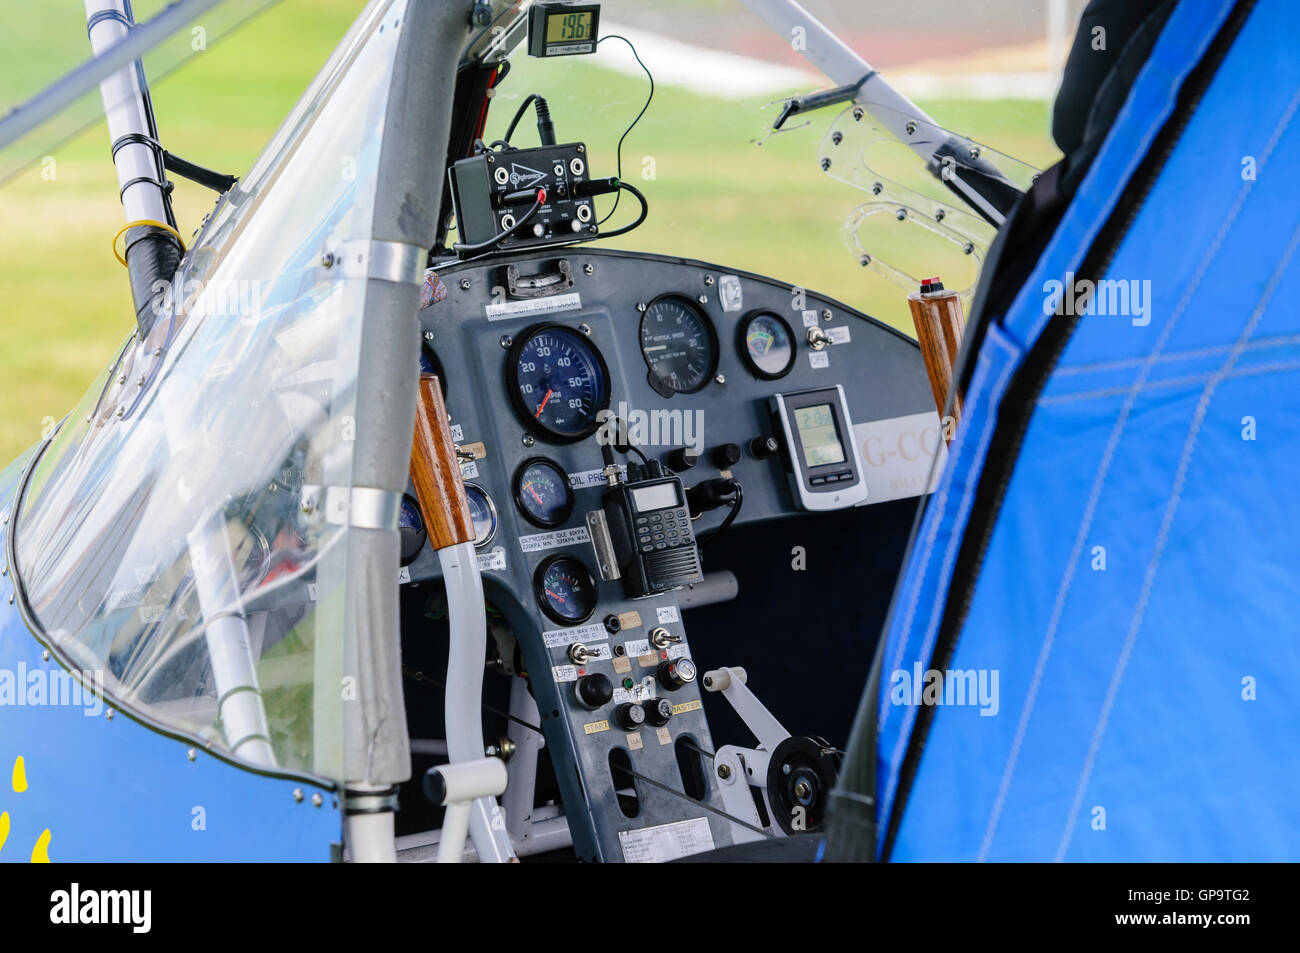 Cockpit of a Thruster T600N Sprint microlight aircraft Stock Photo